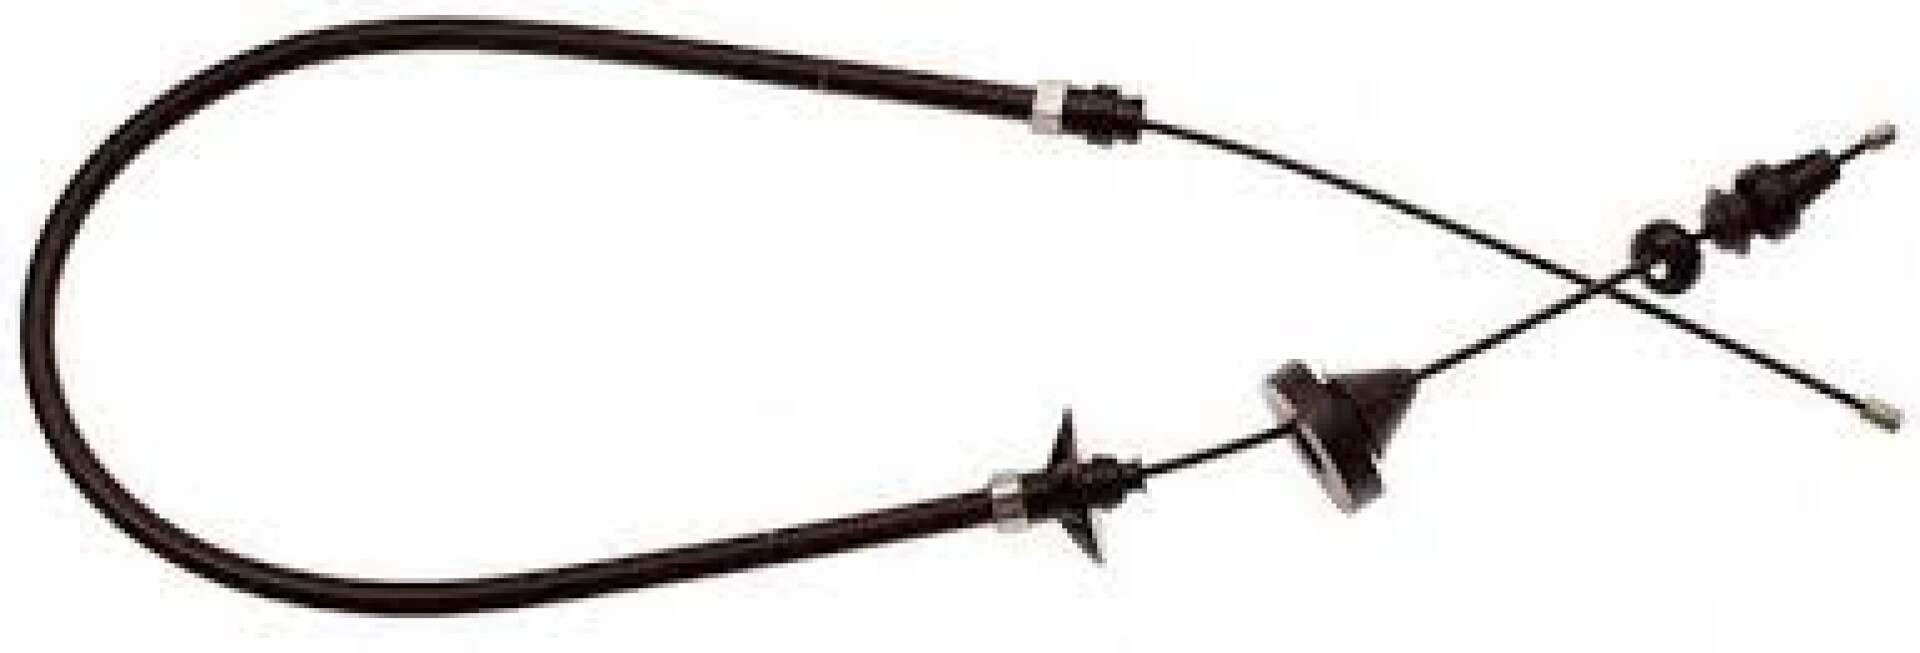 CABLE EMBRAGUE RENAULT 19 88/94 TODOS 1040MM - 